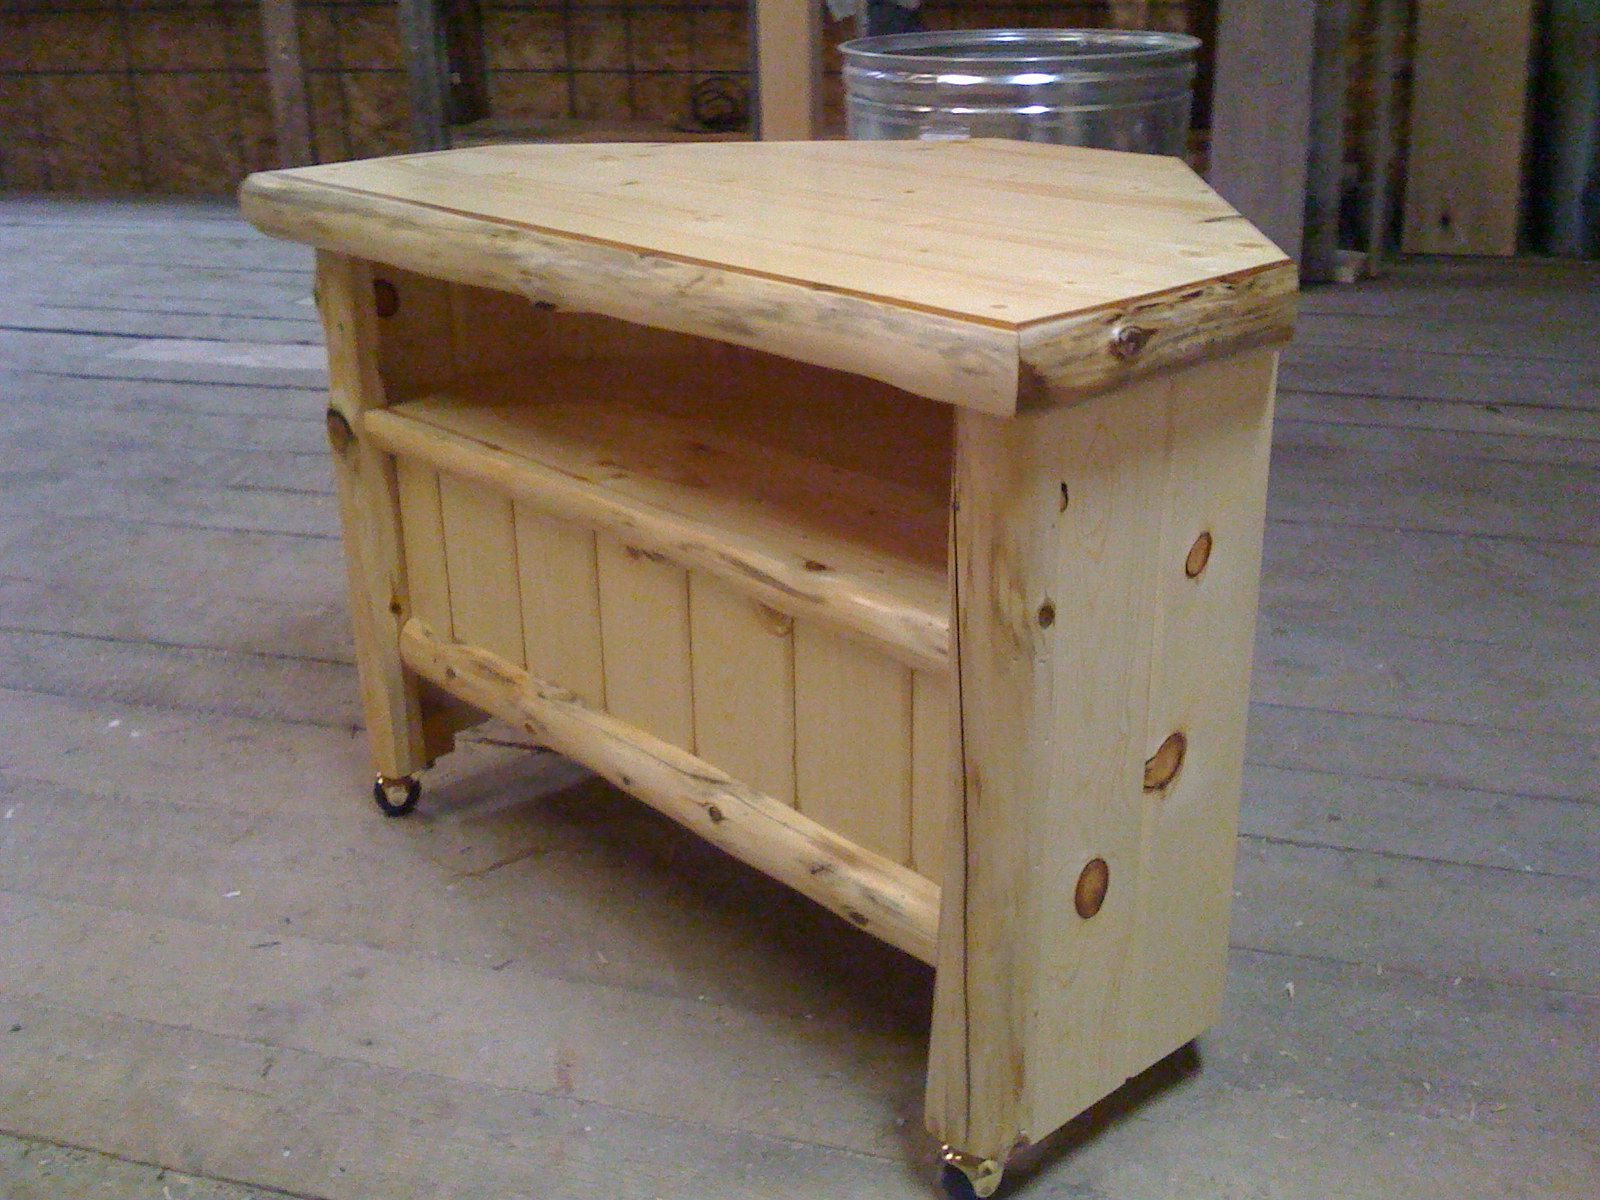 Most Recent Rustic Cedar Tv Stand Log Plans Cabin Stands Corner For Flat Screens Pertaining To Rustic Corner Tv Stands (View 9 of 20)